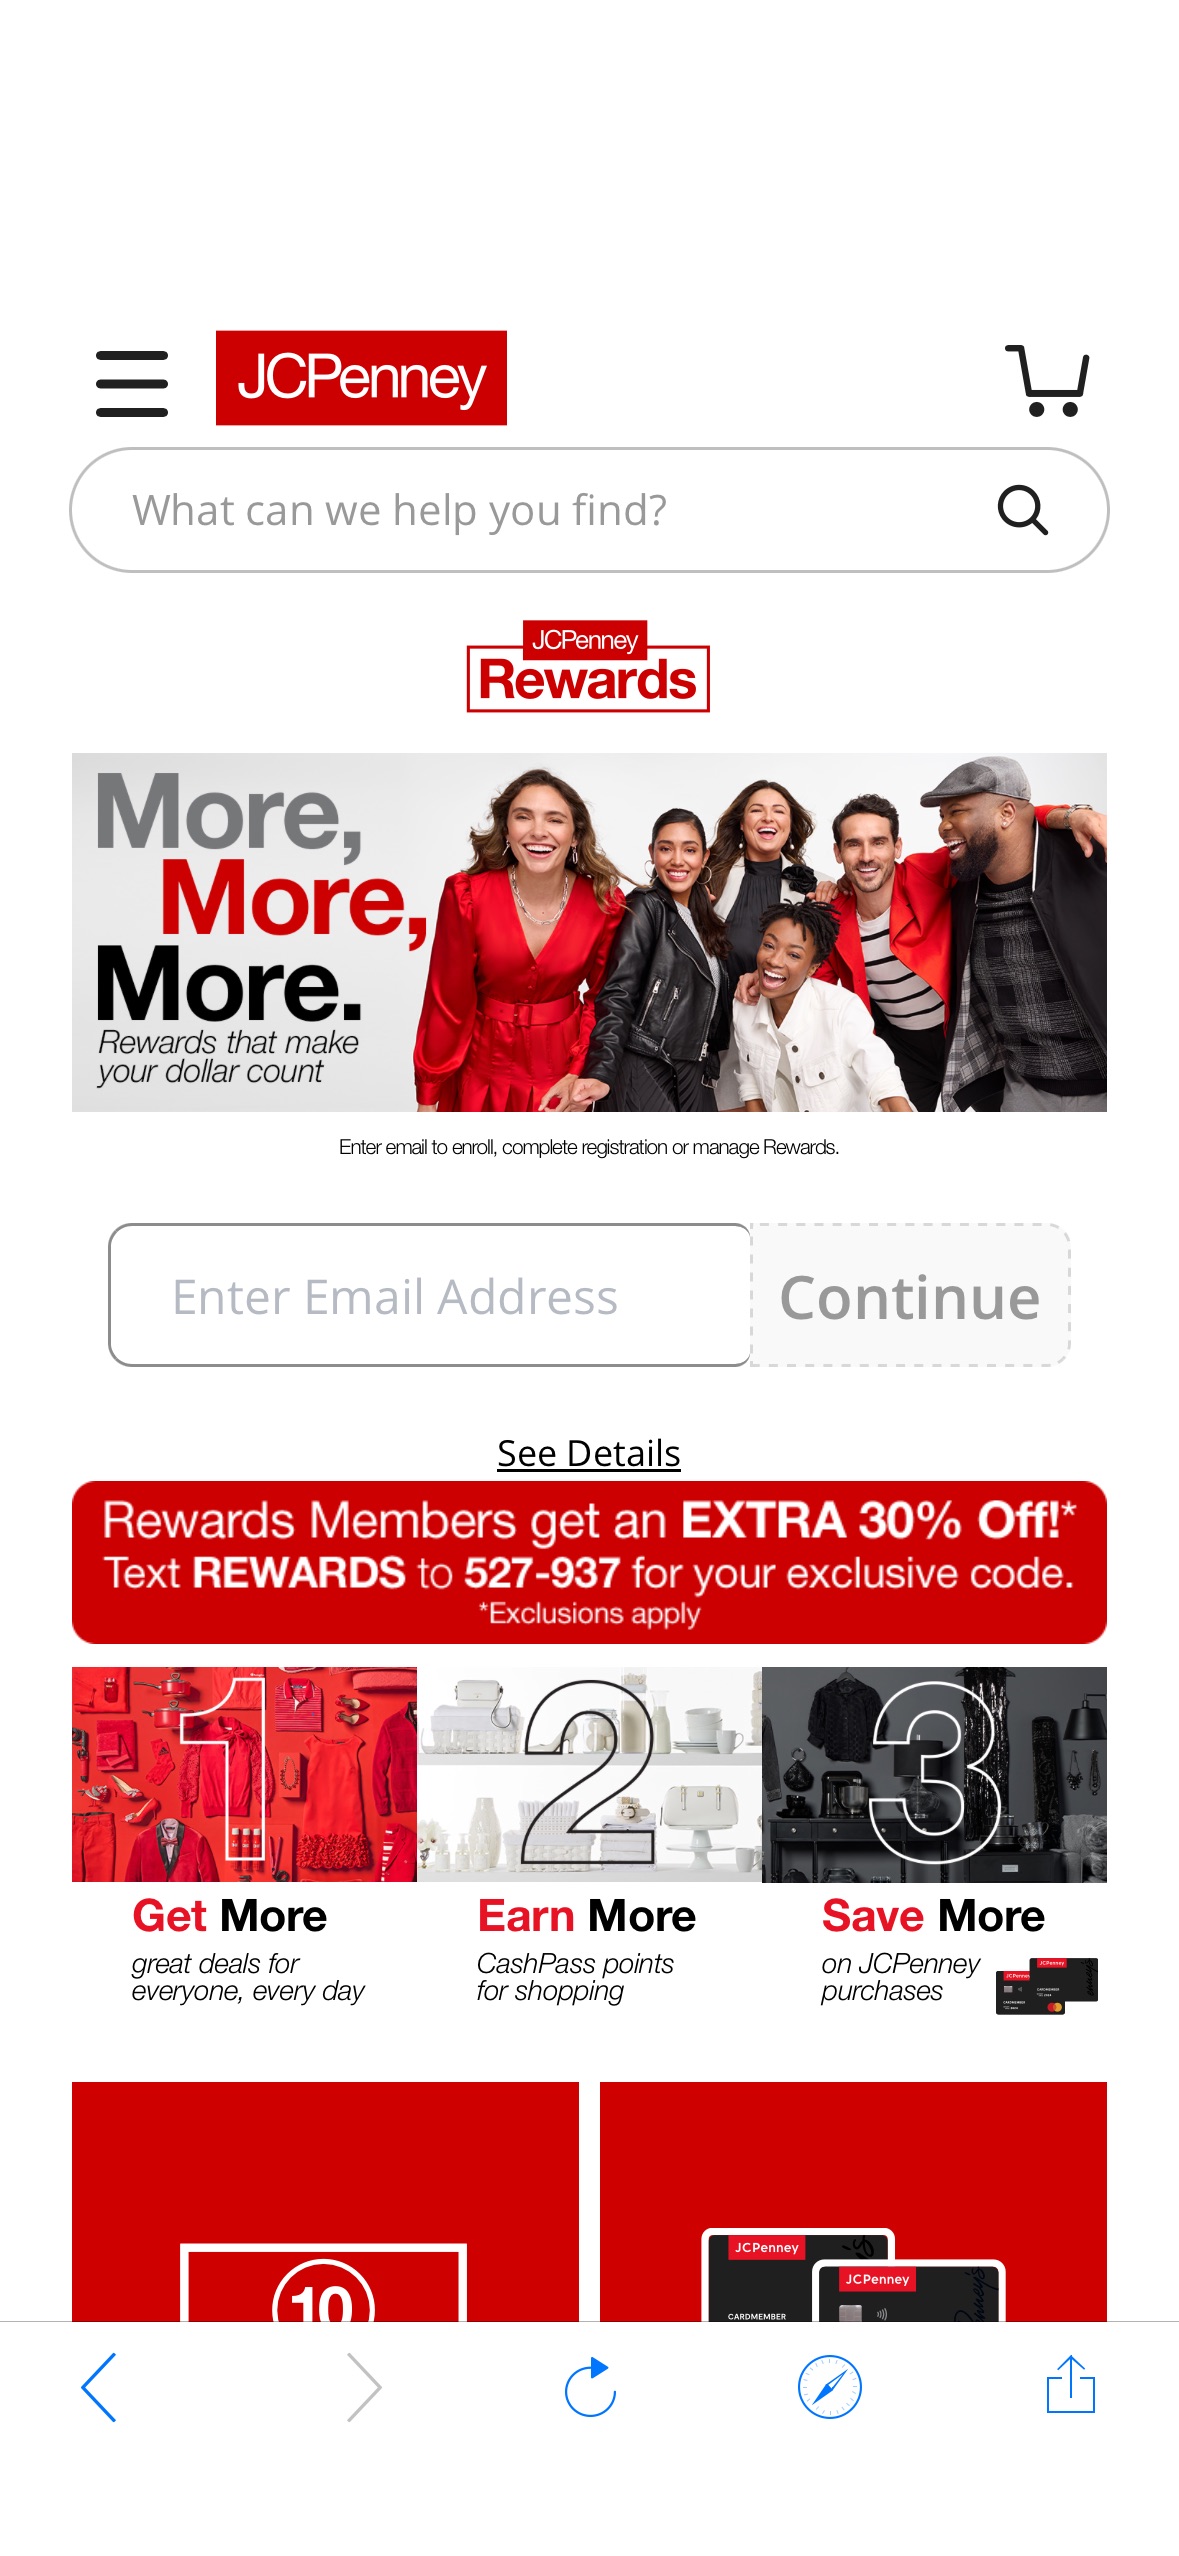 Free $10.00 off $10.00 CashPass Reward at JCPenney! NEW JCPenney Rewards Members can sign up, and instantly score a $10.00 off $10.00 CashPass Reward! Reward can be redeemed in store or online! Mine